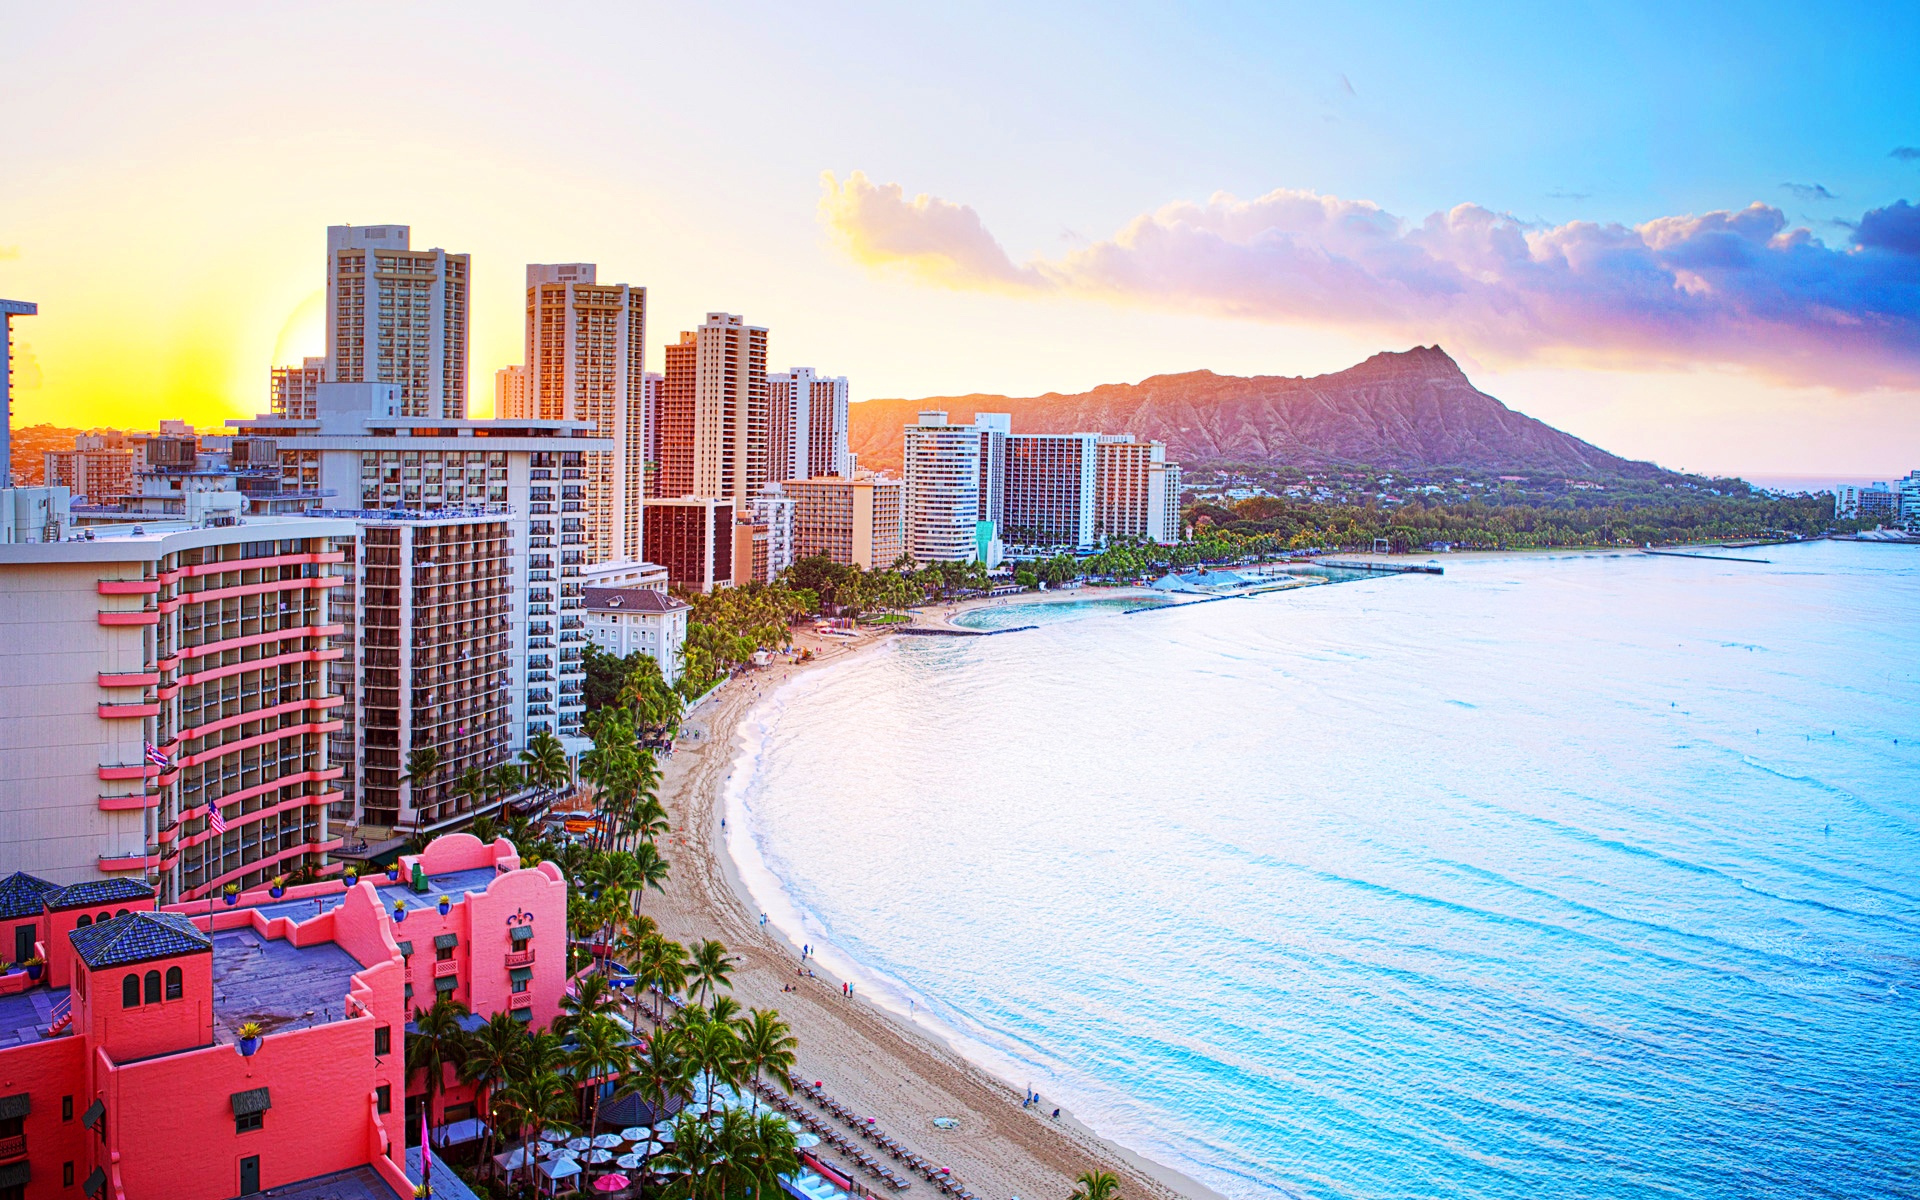 40 Free HD Hawaii Wallpapers For Download